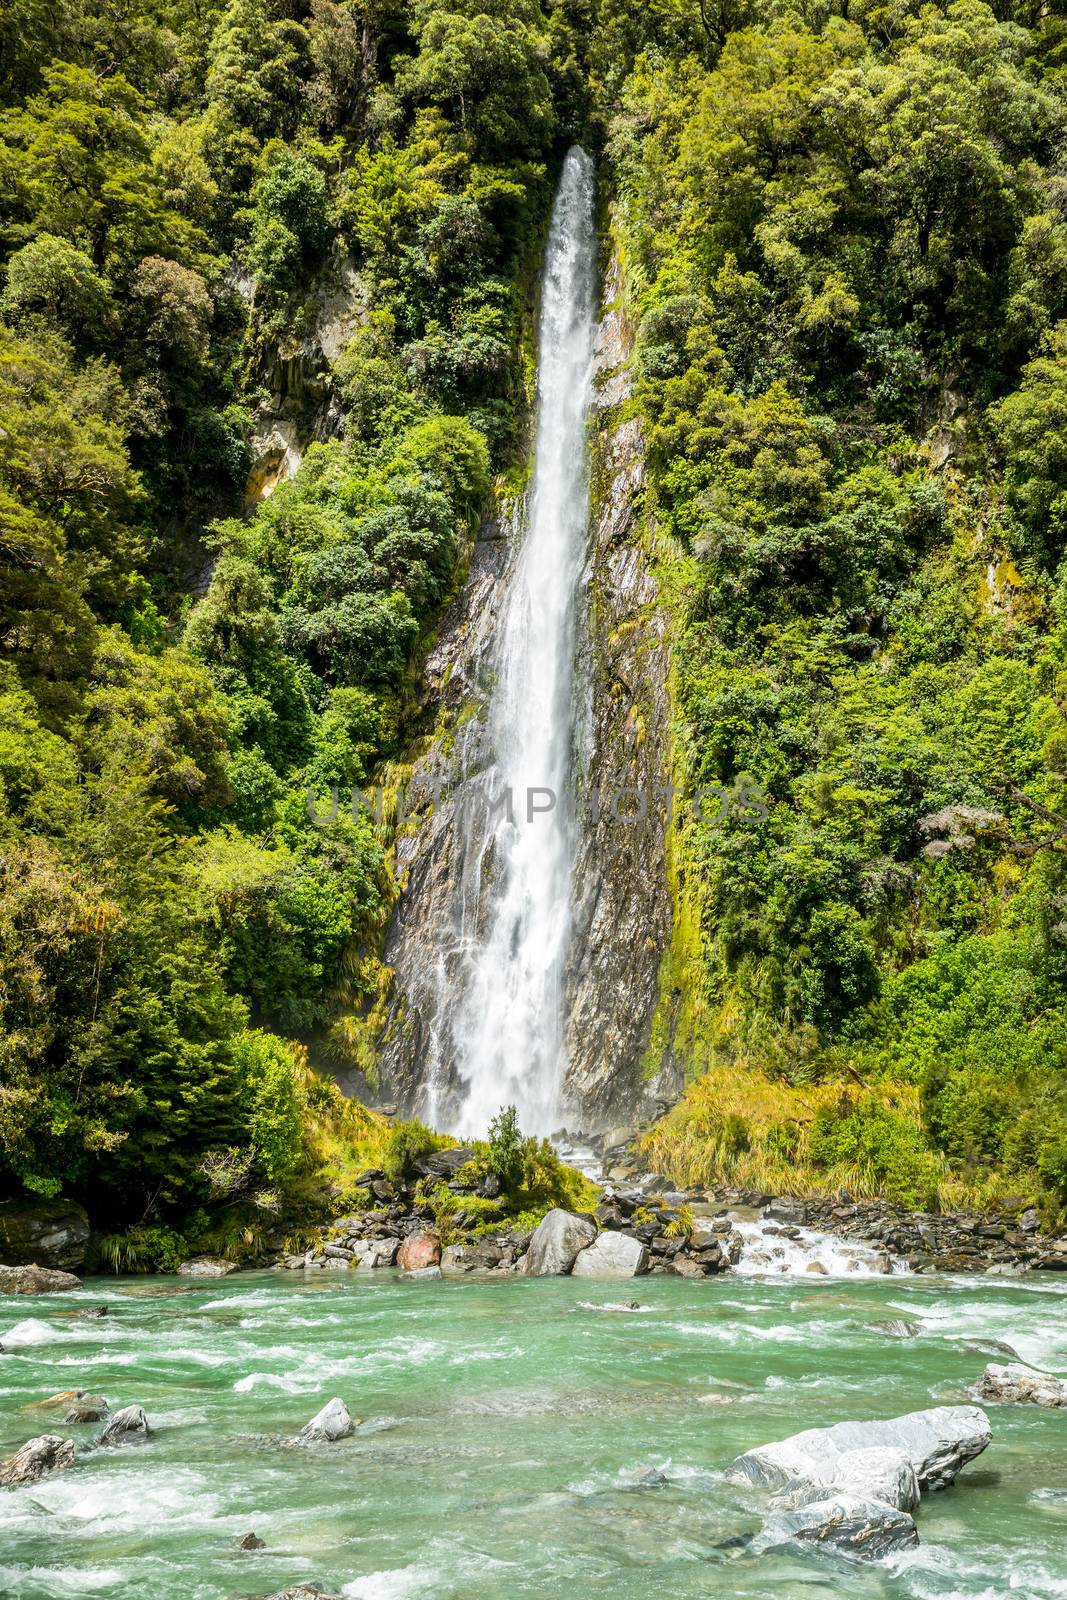 An image of the Thunder Creek Falls, New Zealand